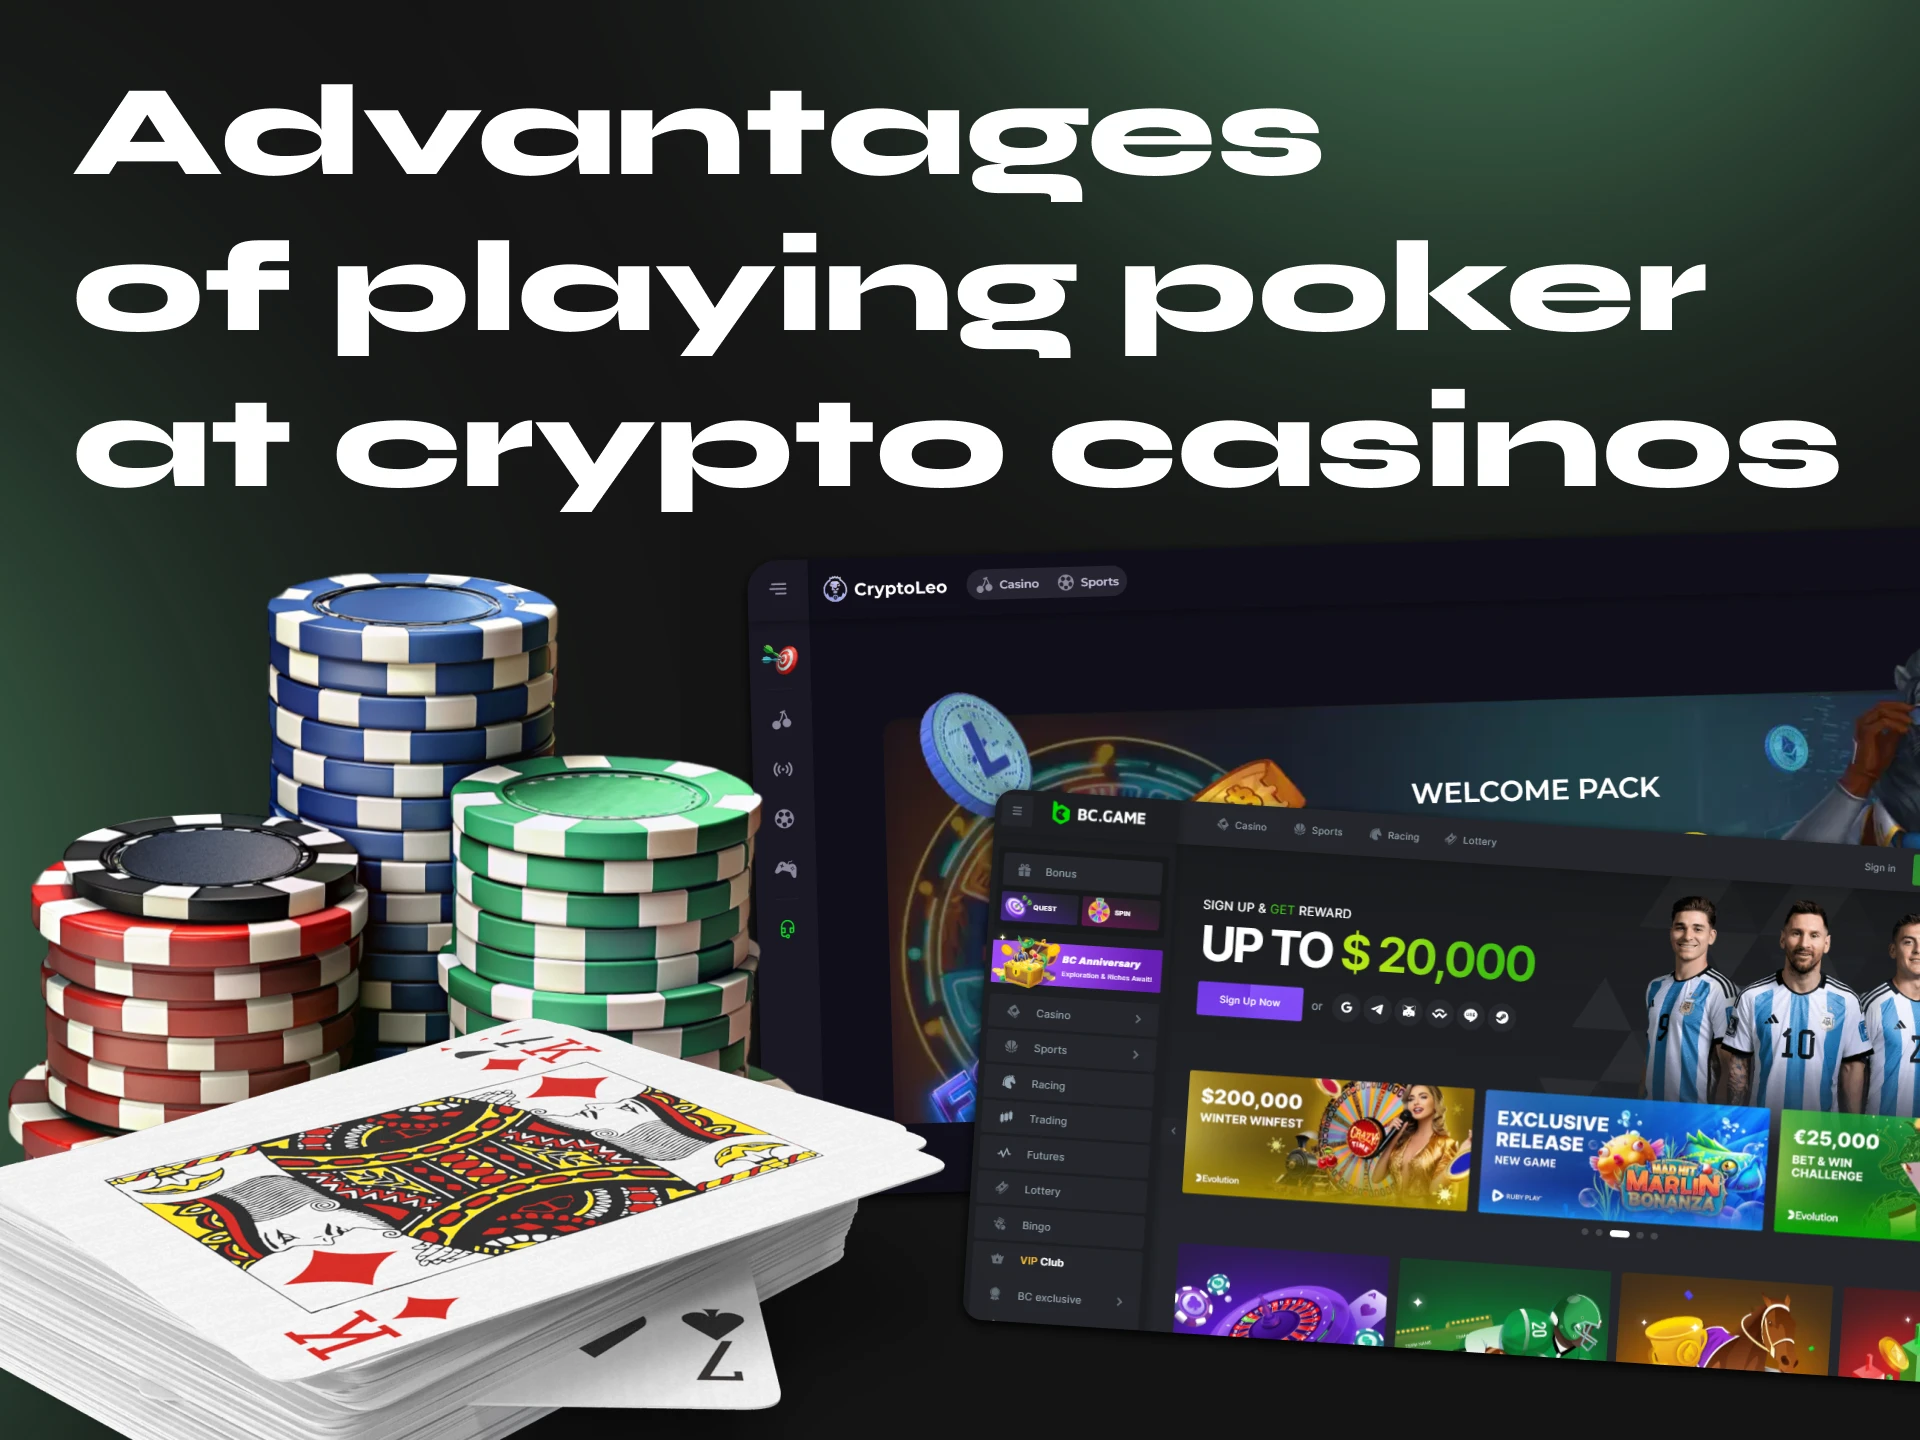 Playing poker with cryptocurrency is much more better than with fiat money.